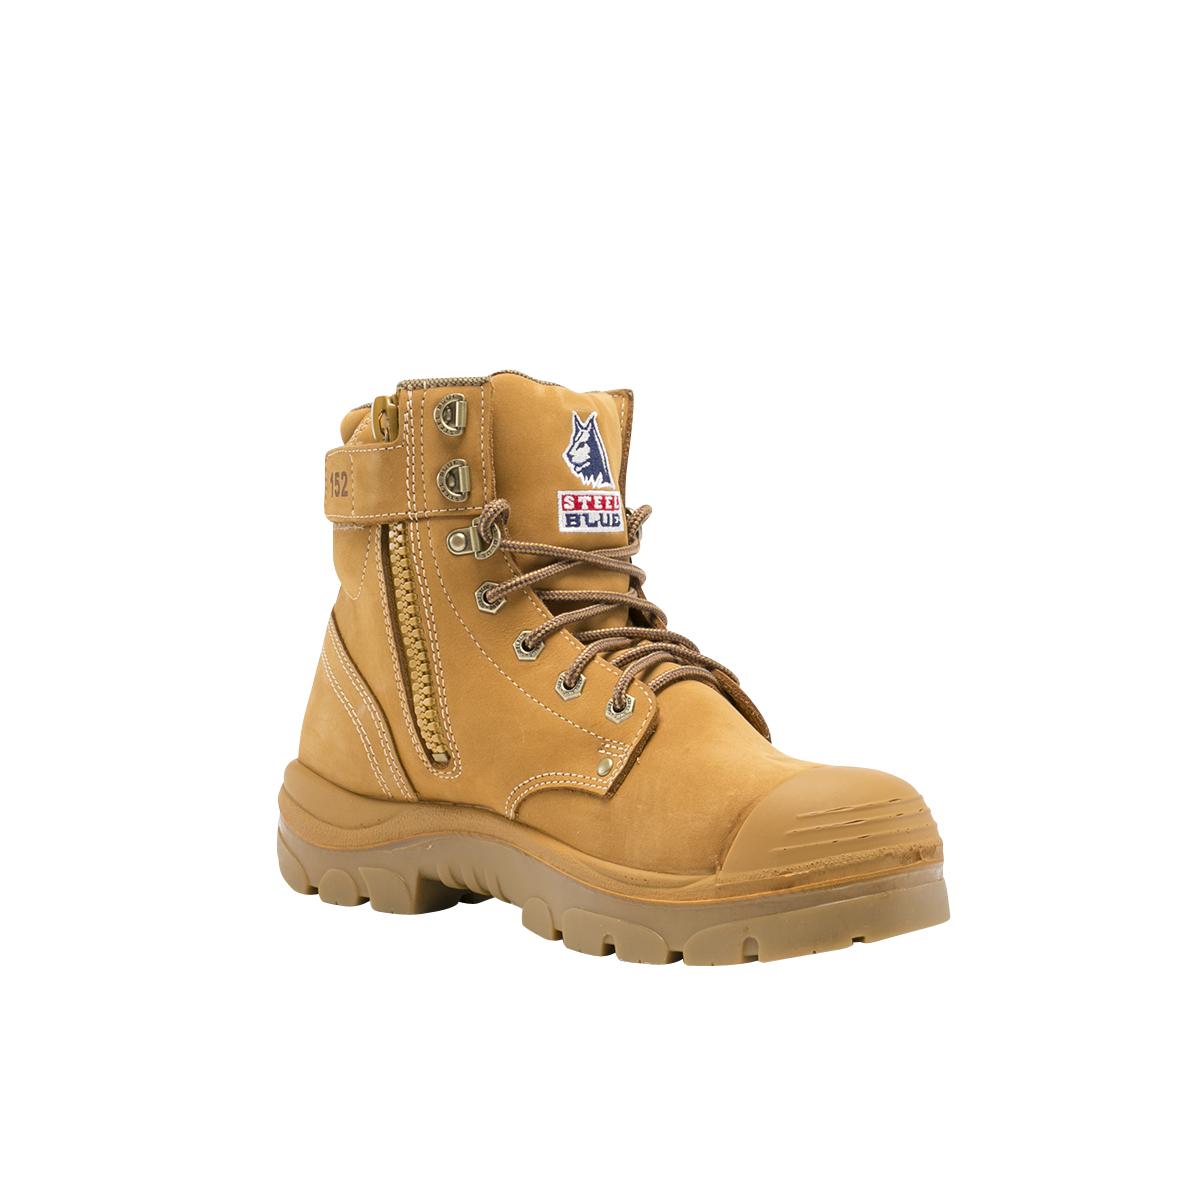 SAFETY BOOT ARGYLE WHEAT ZIP S10 -BUMPCAP ANKLE LACE